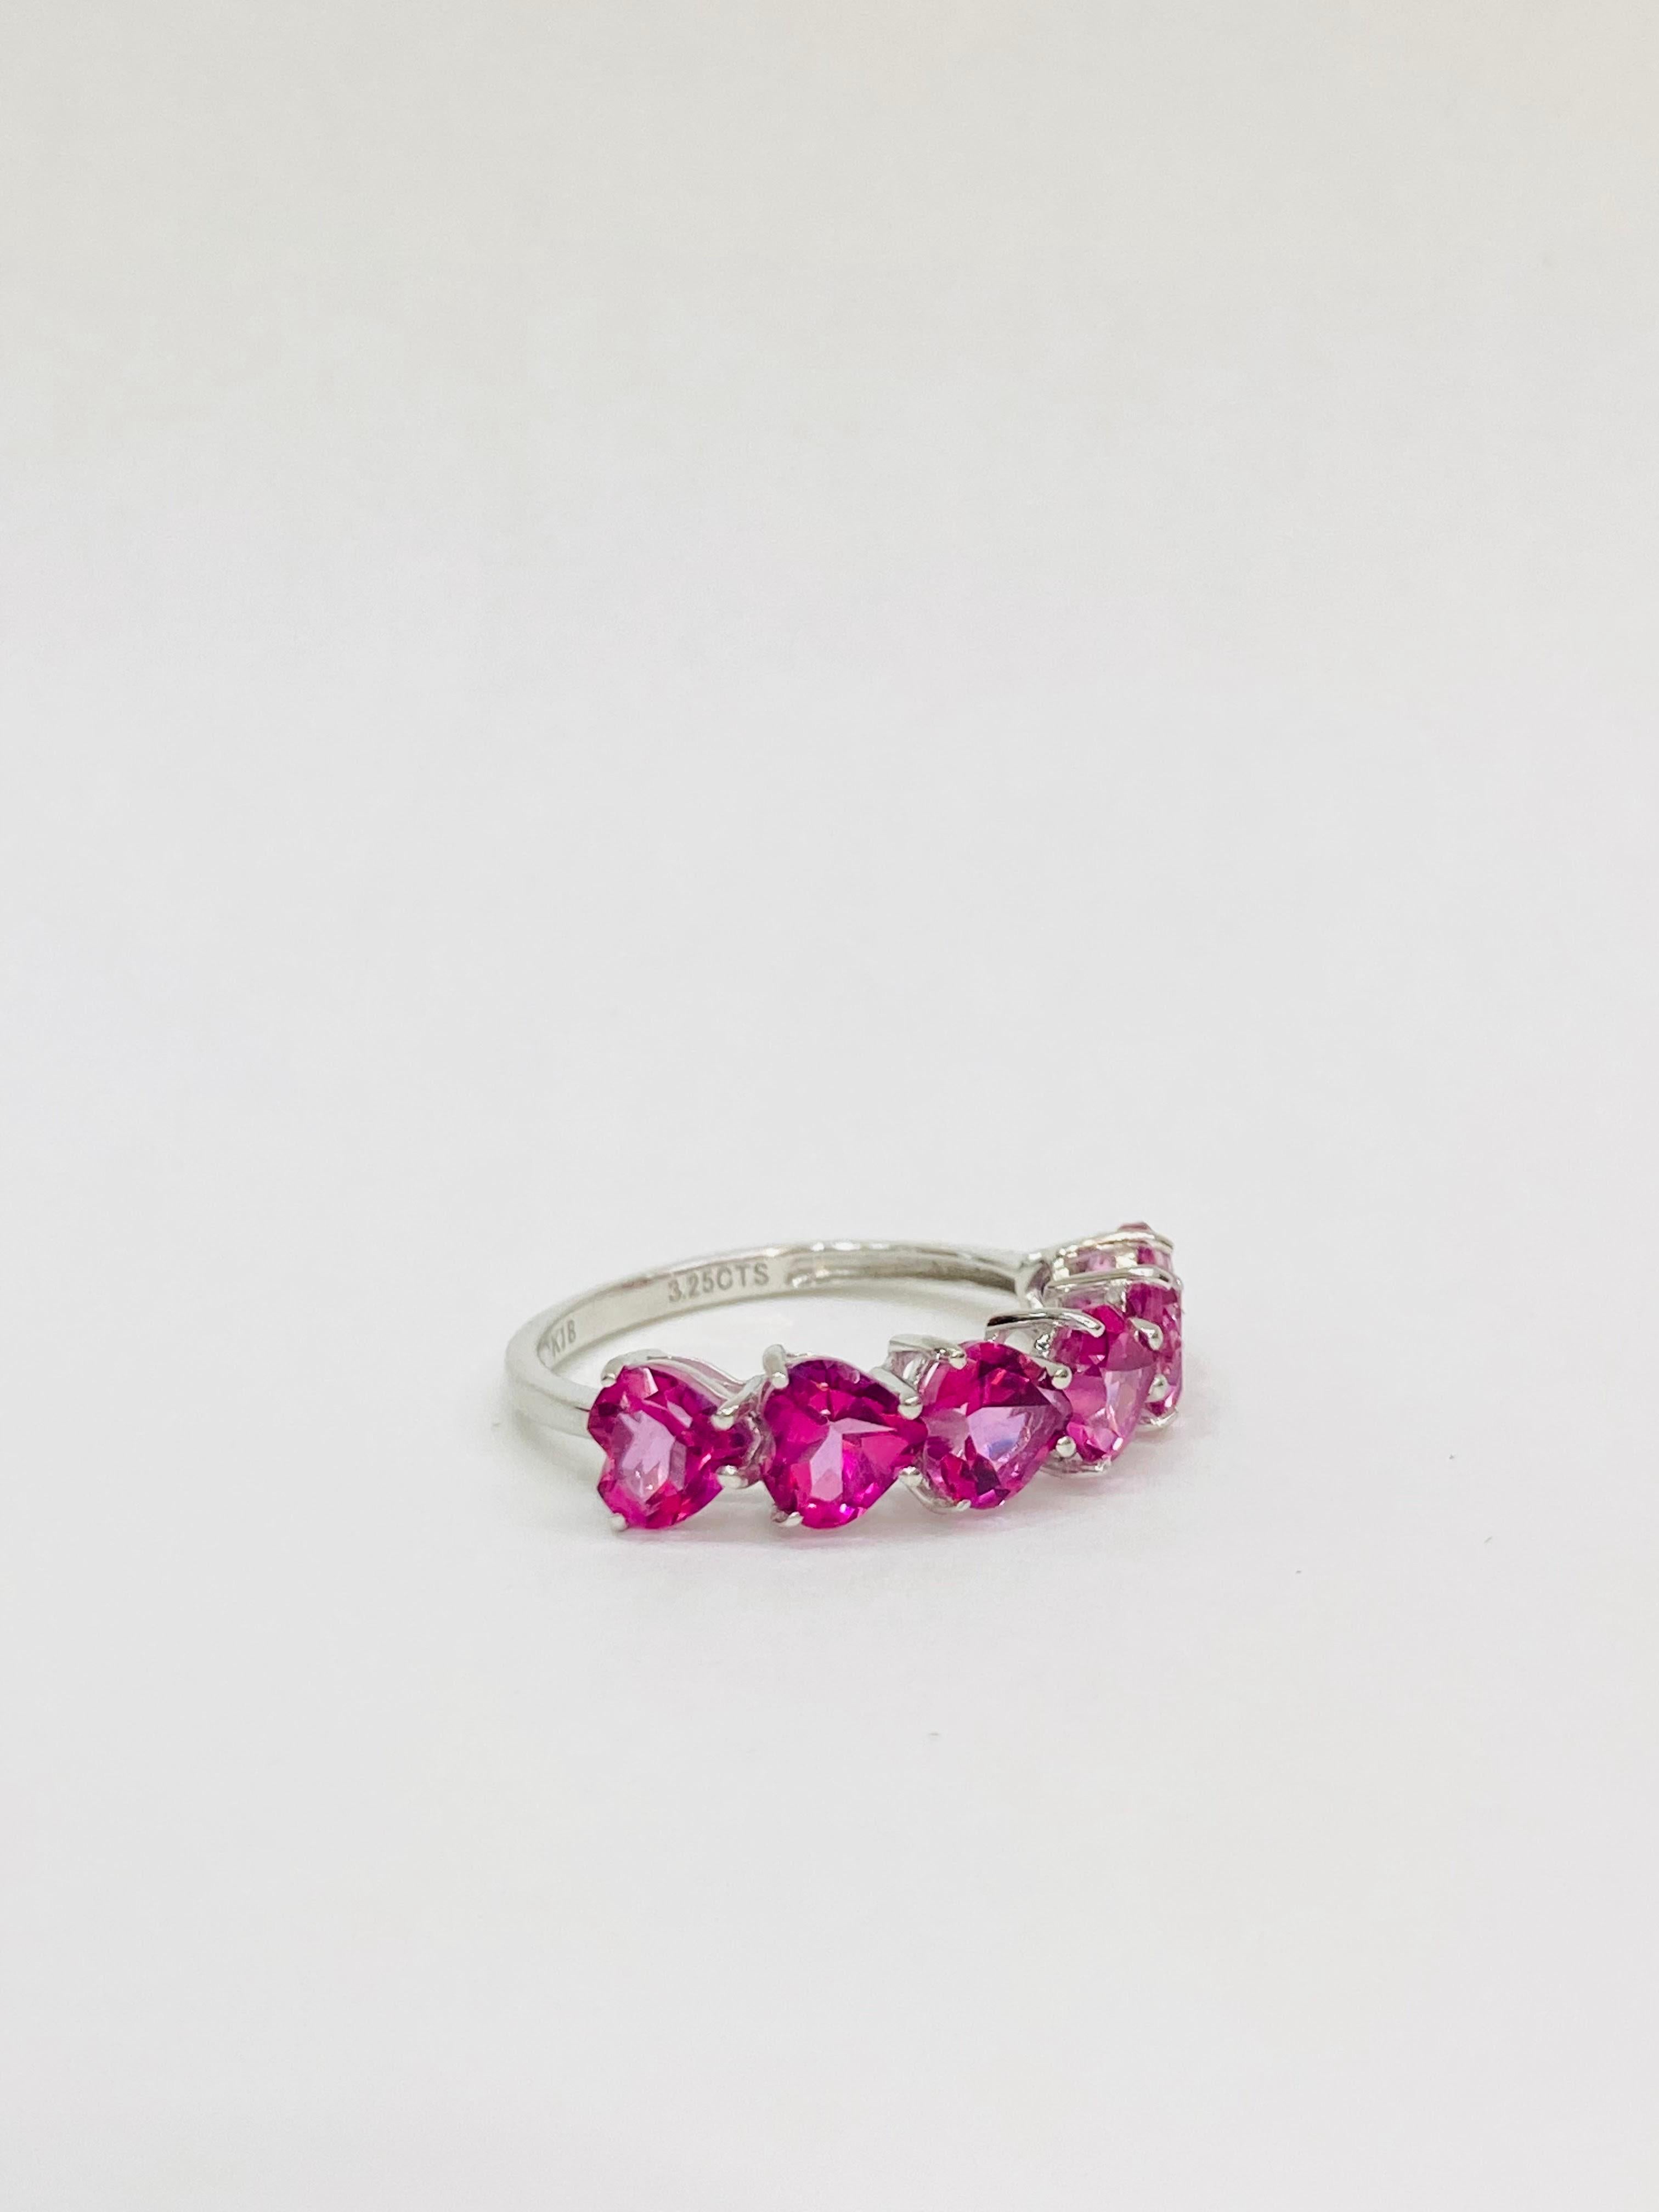 Bochic “Vintage Retro” Eternity 18K Gold & Heart Shape Hot Pink Topaz Ring  In New Condition For Sale In New York, NY